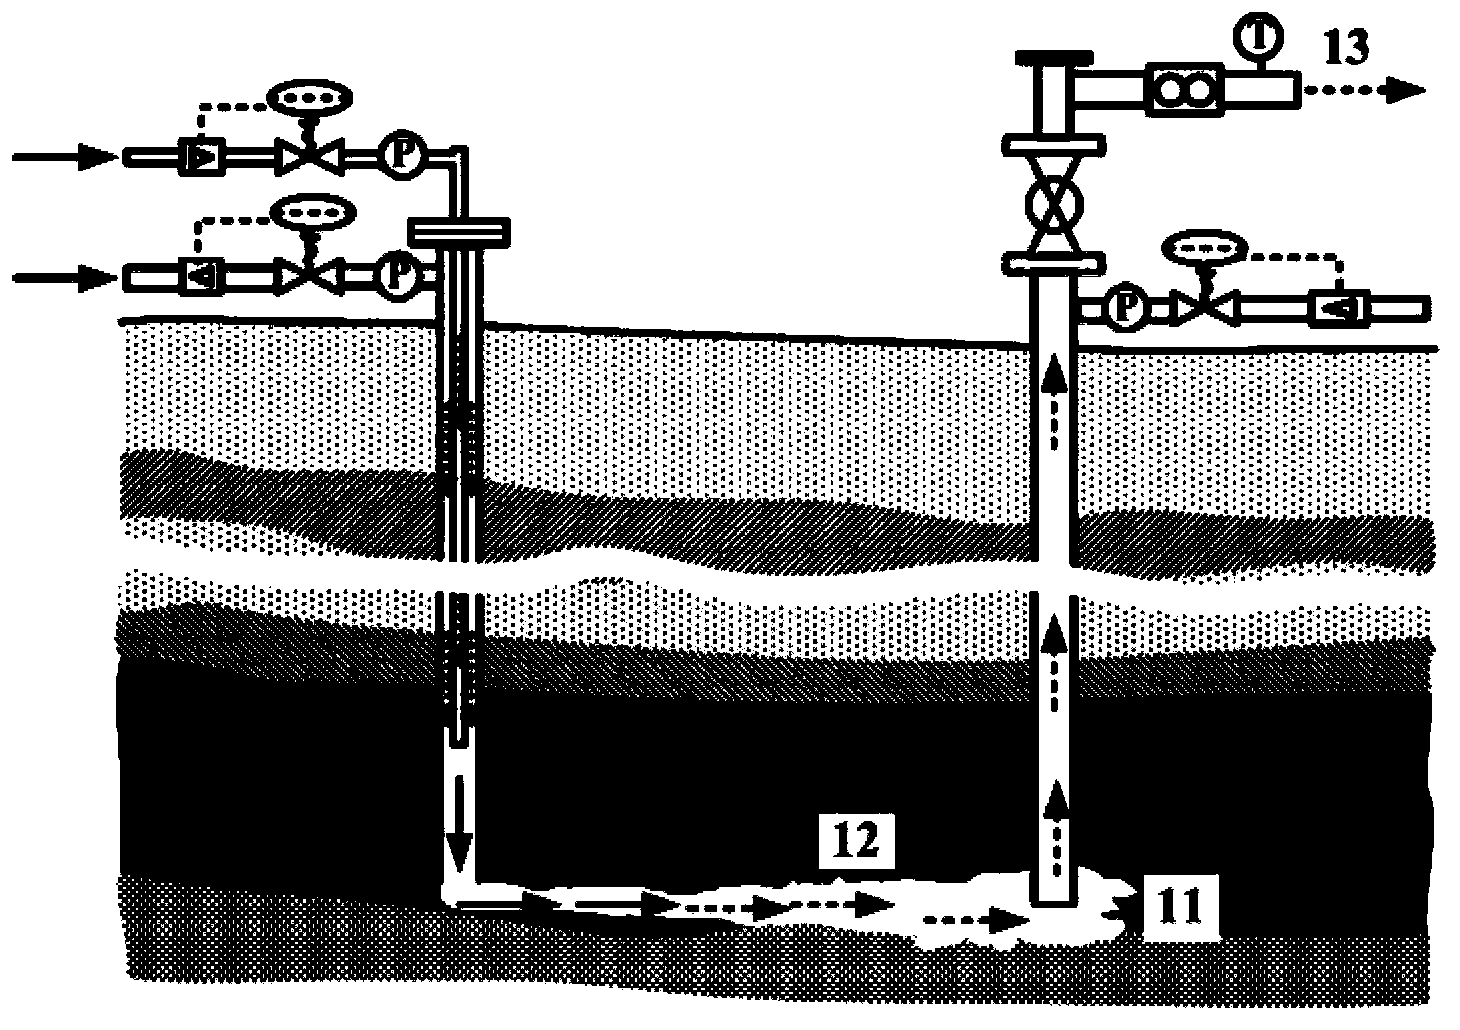 Method for extracting coalbed methane and coal together